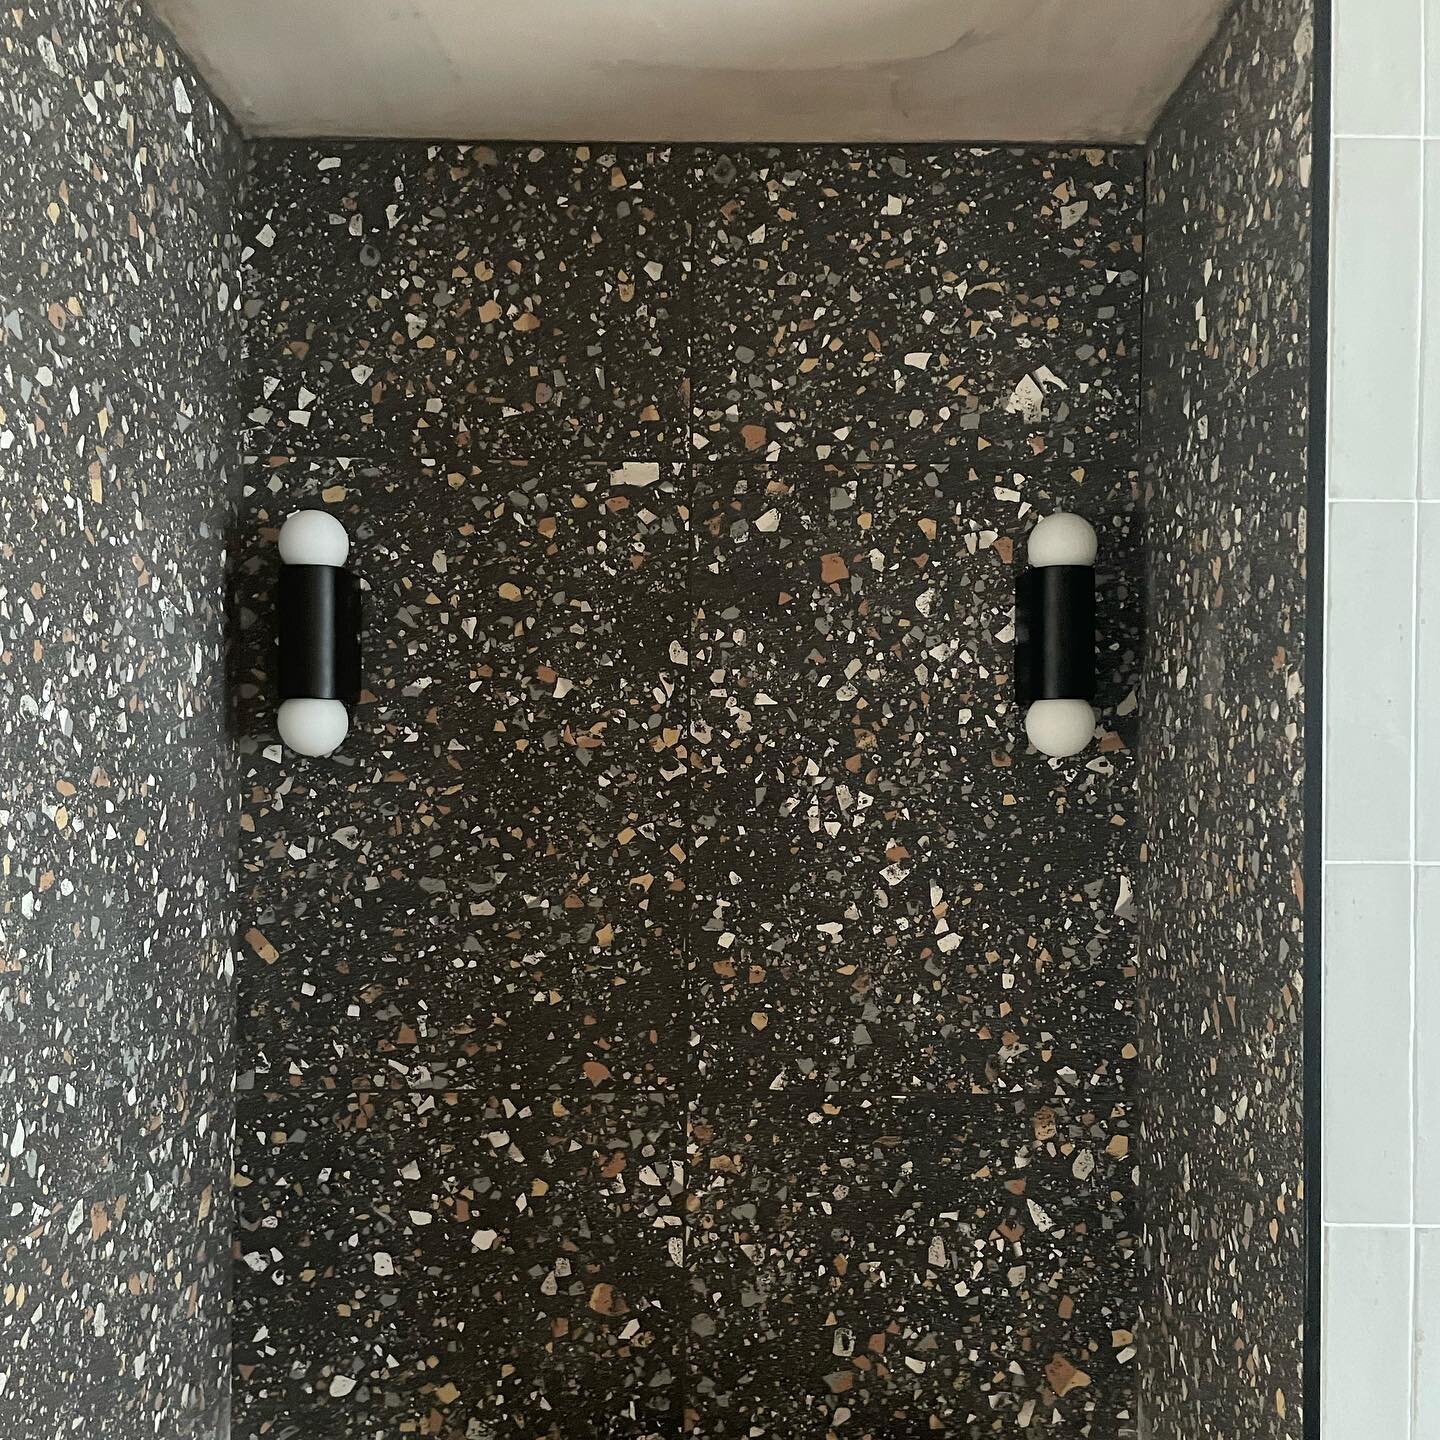 Our loft bathroom is all fully tiled in @mandarinstoneofficial tiles and this is my favourite nook of top to bottom terrazzo graphite porcelain tiles. Now that we&rsquo;ve got our @madedotcom wall lights on, it&rsquo;s really coming to life 😃.
Build